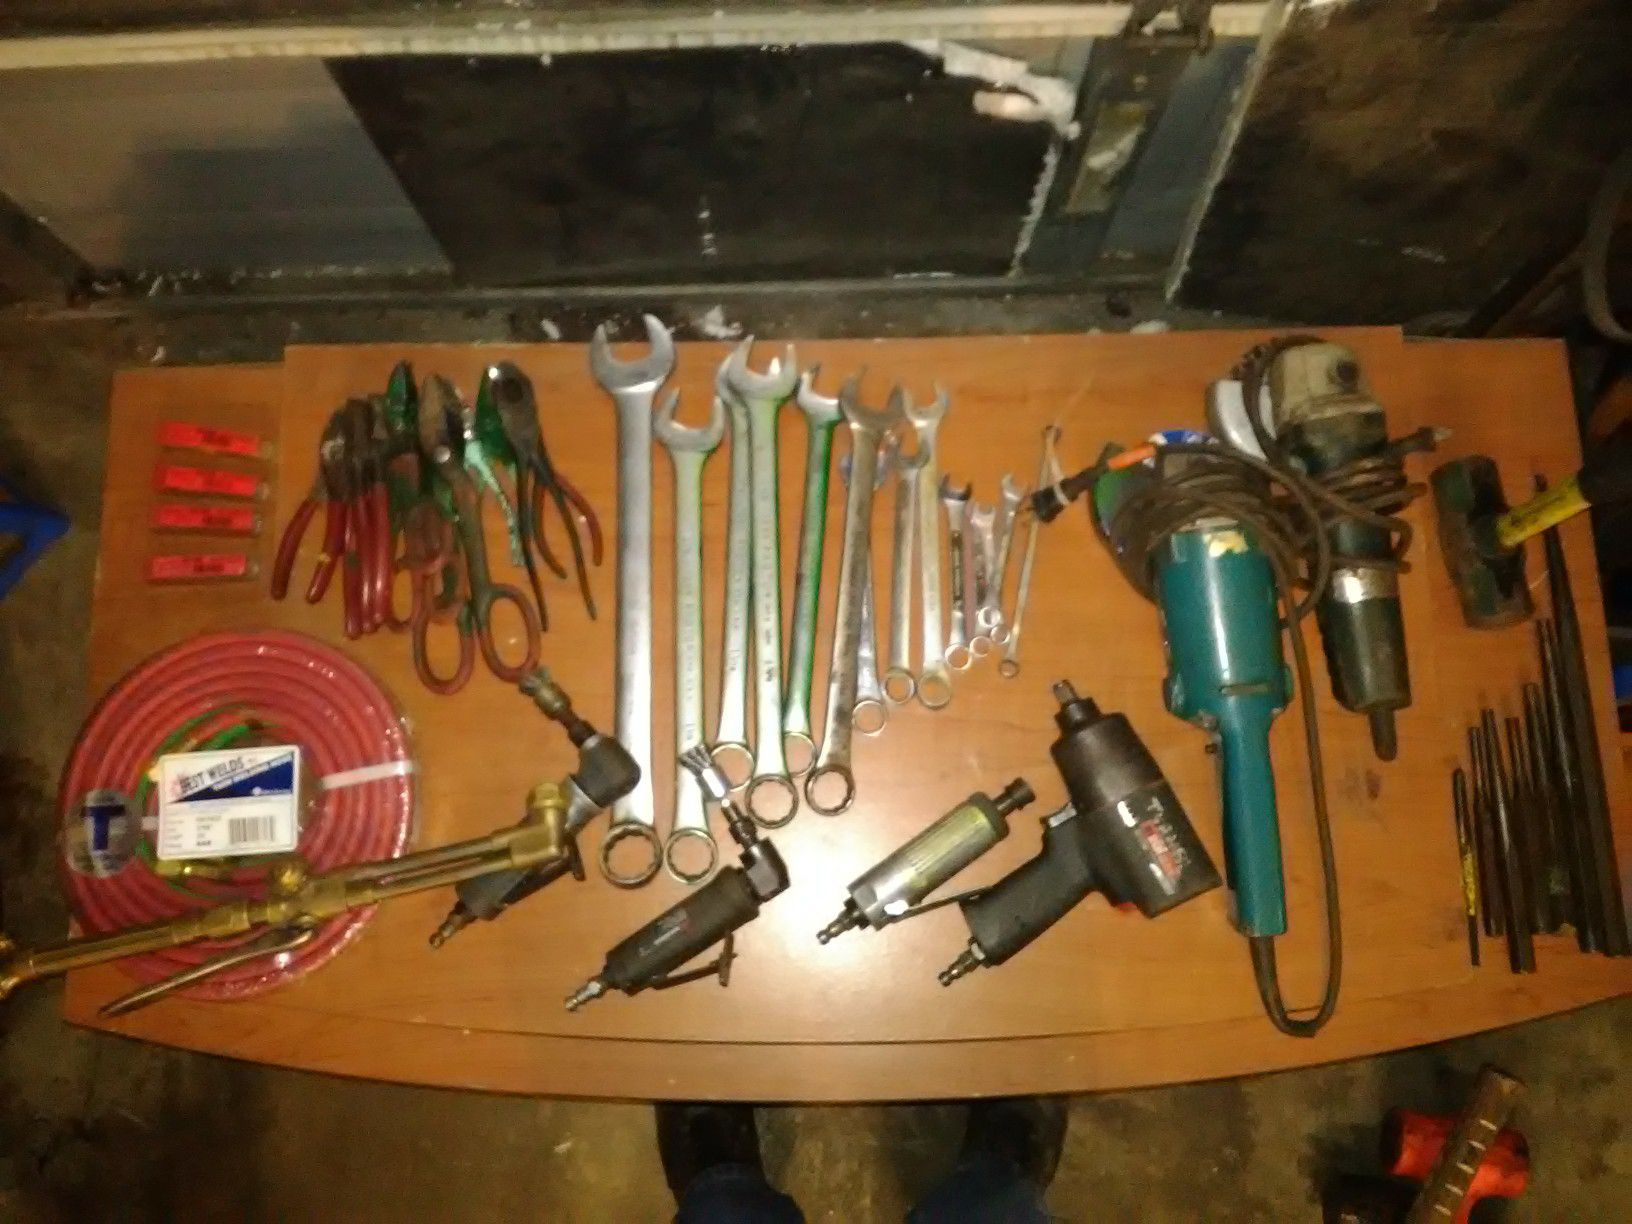 TOOLS. All for $150.